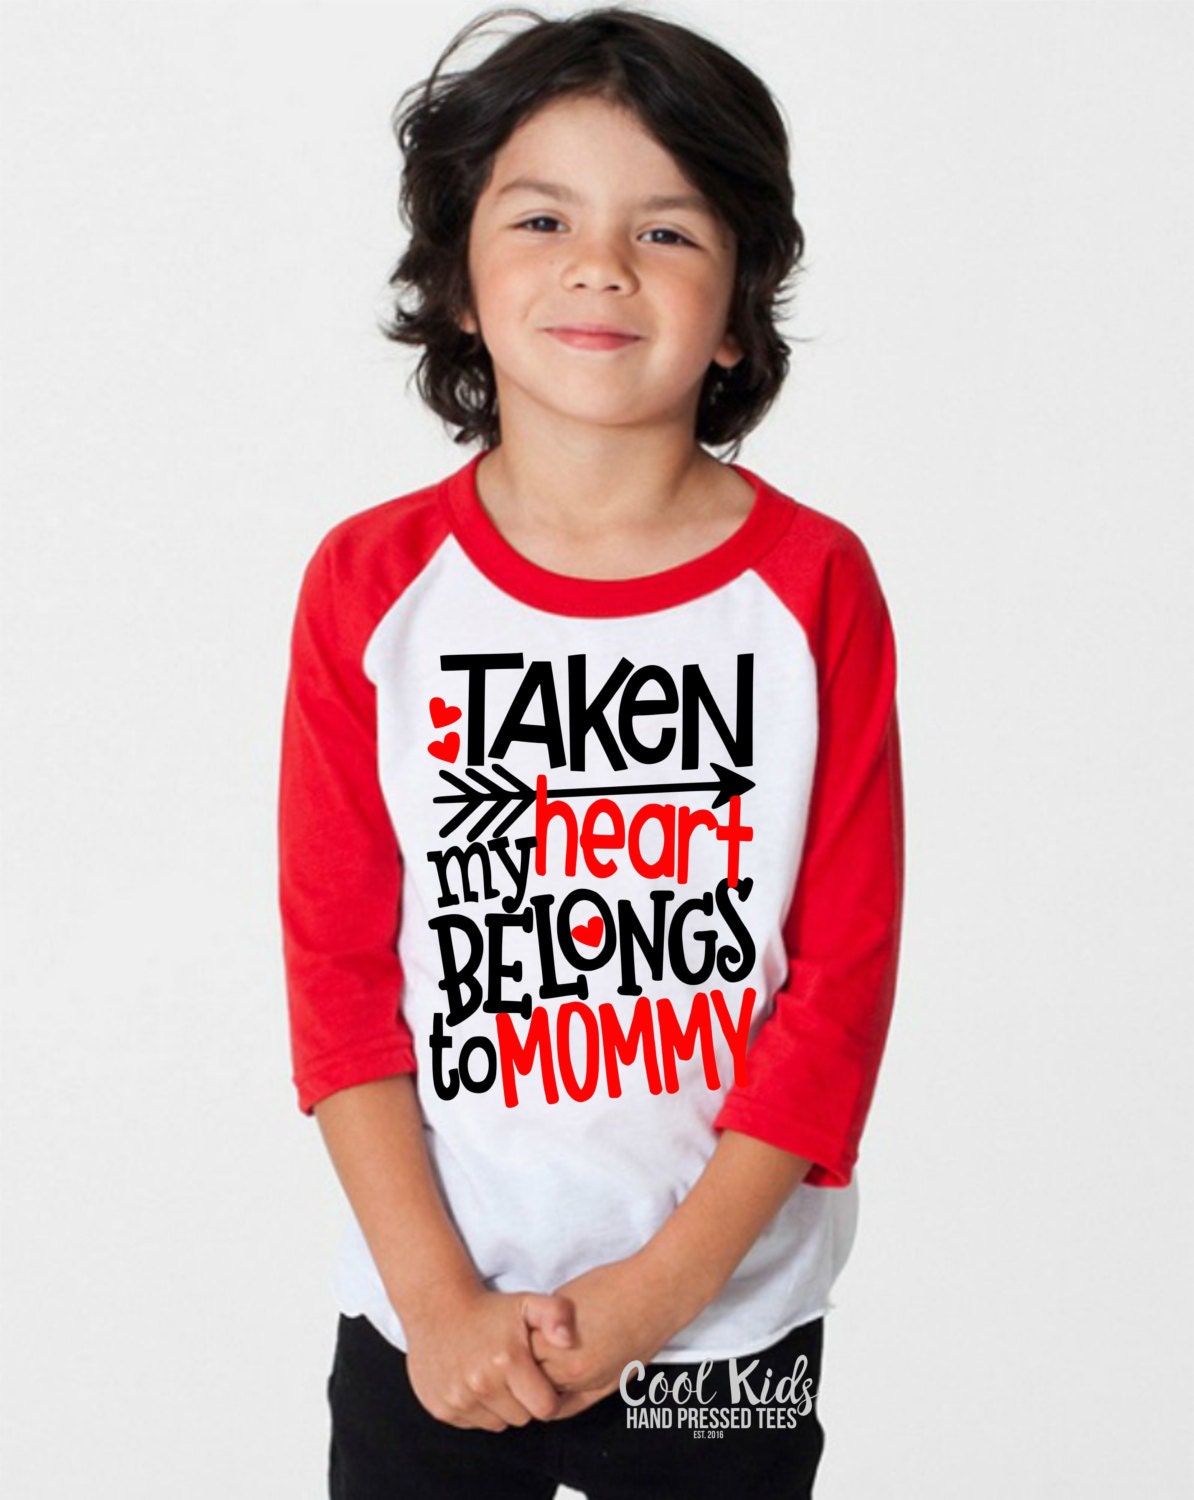 Valentines Day Shirts For Girls - Valentine Shirt for Girls zebra heart by  - Target.com has 